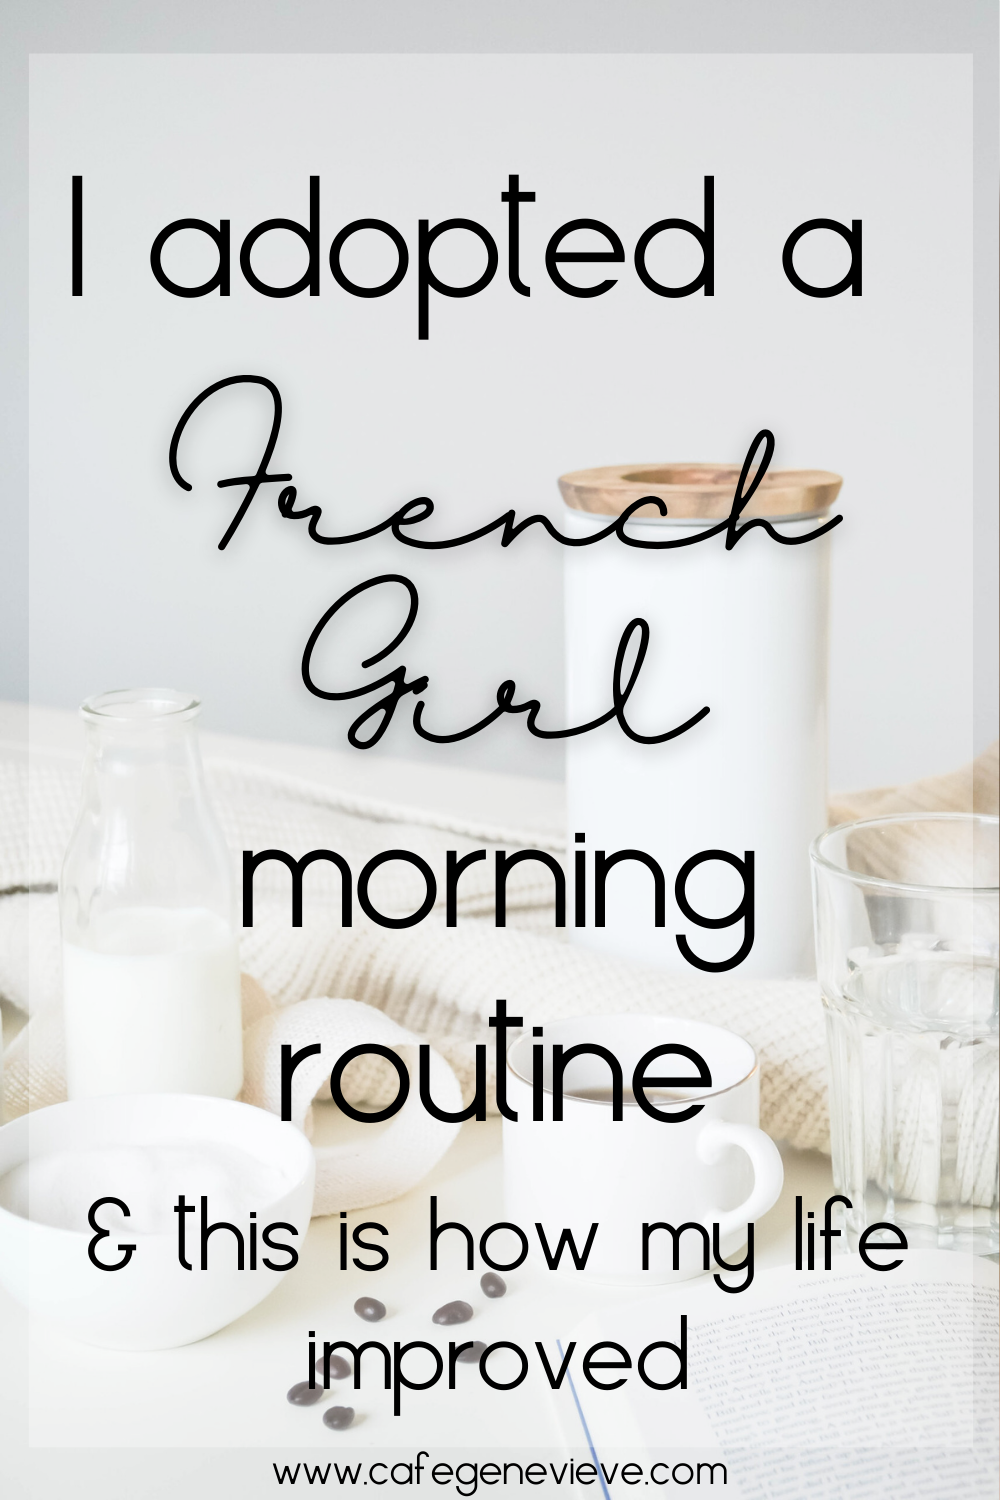 My French Girl morning routine, and how my life has improved